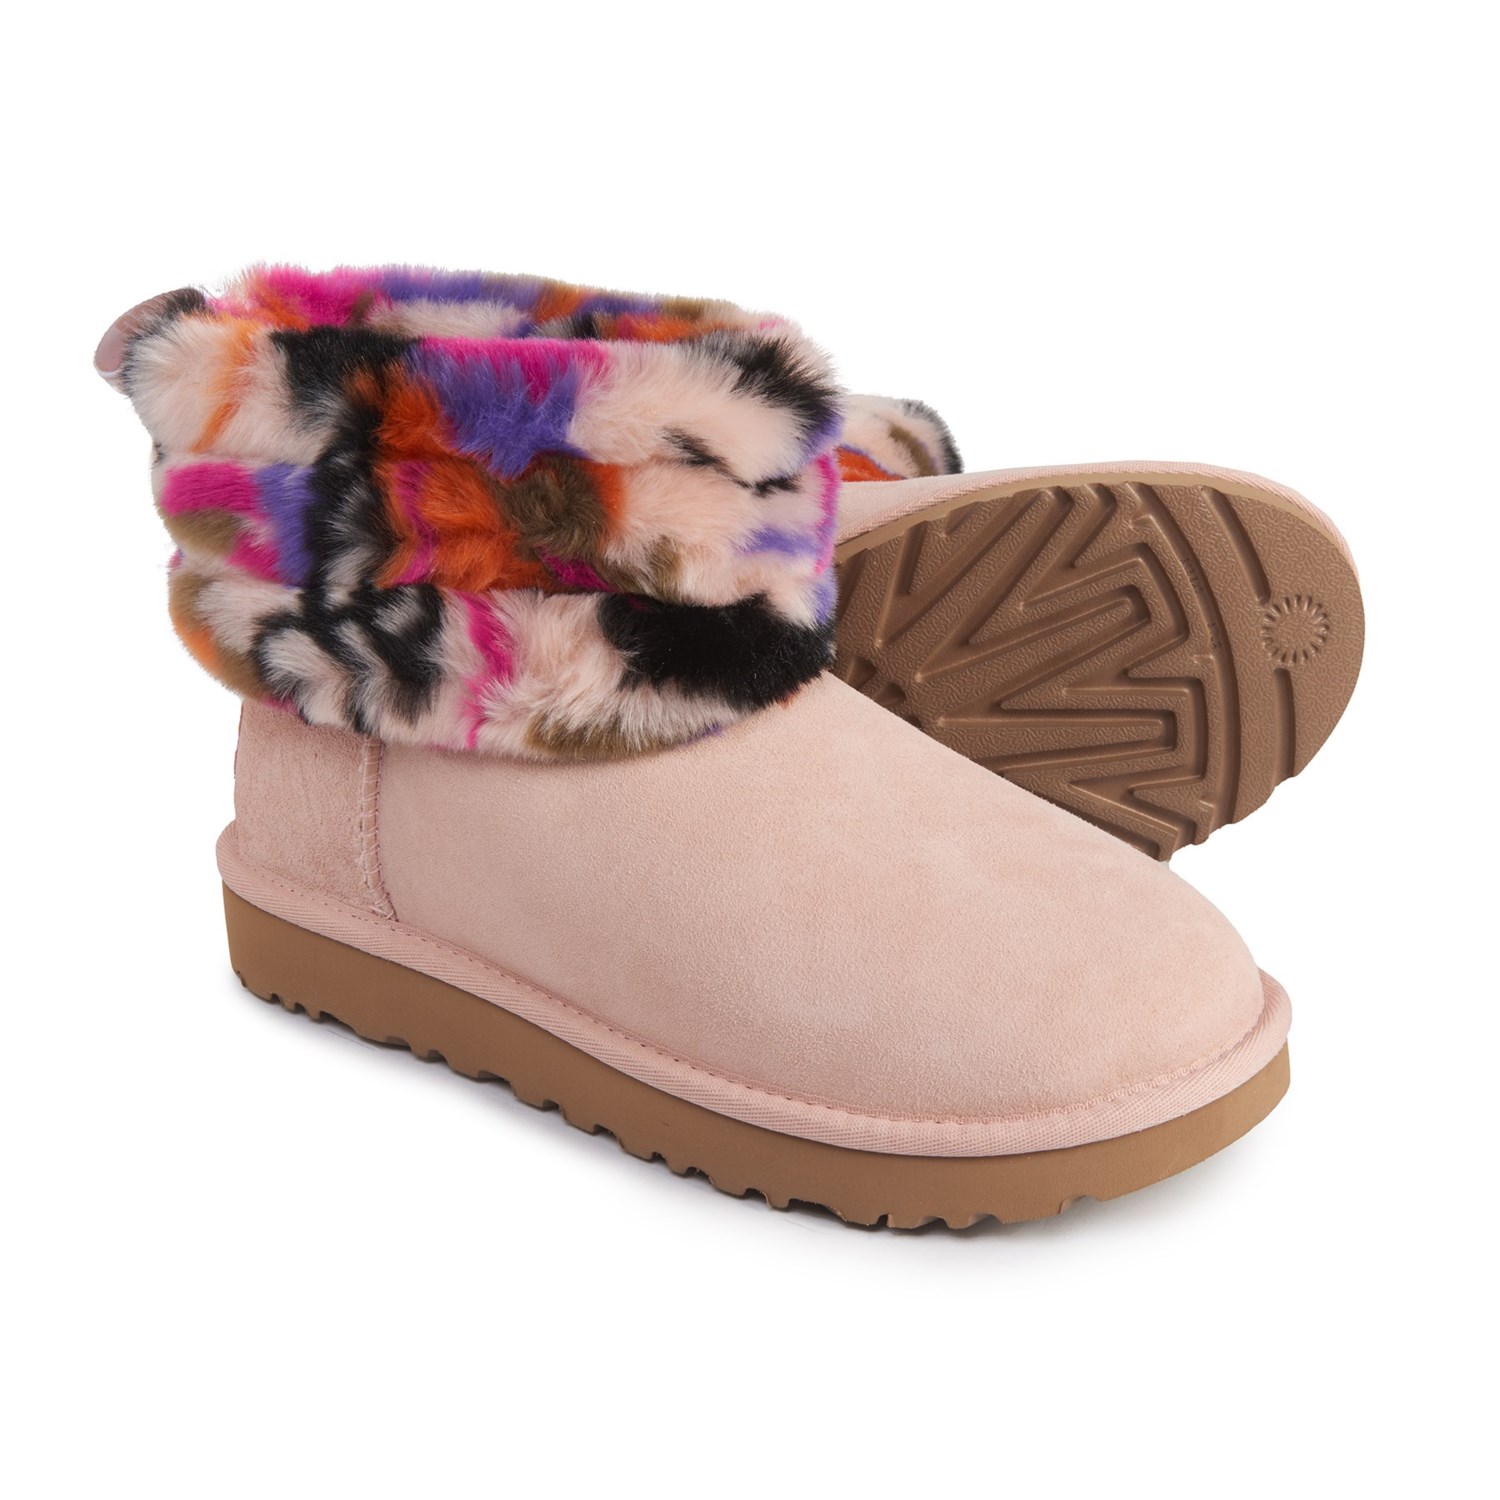 ugg fluff mini quilted logo boots women's